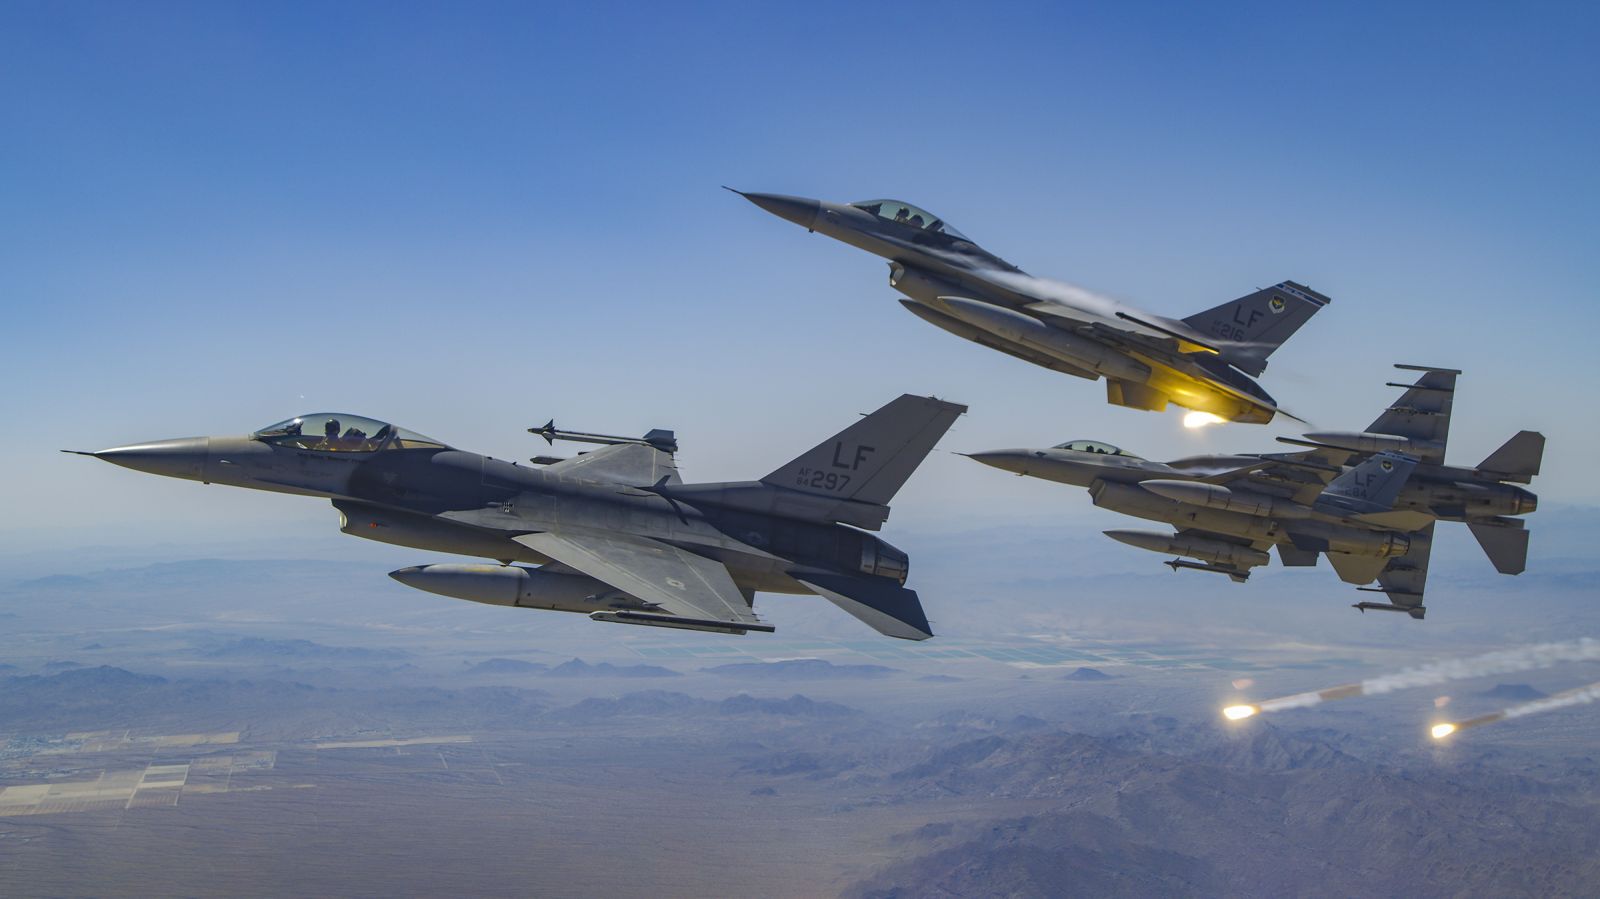 F-16 Fighting Falcons make up the largest fleet of aircraft in the airforce. (Photo/Provided)